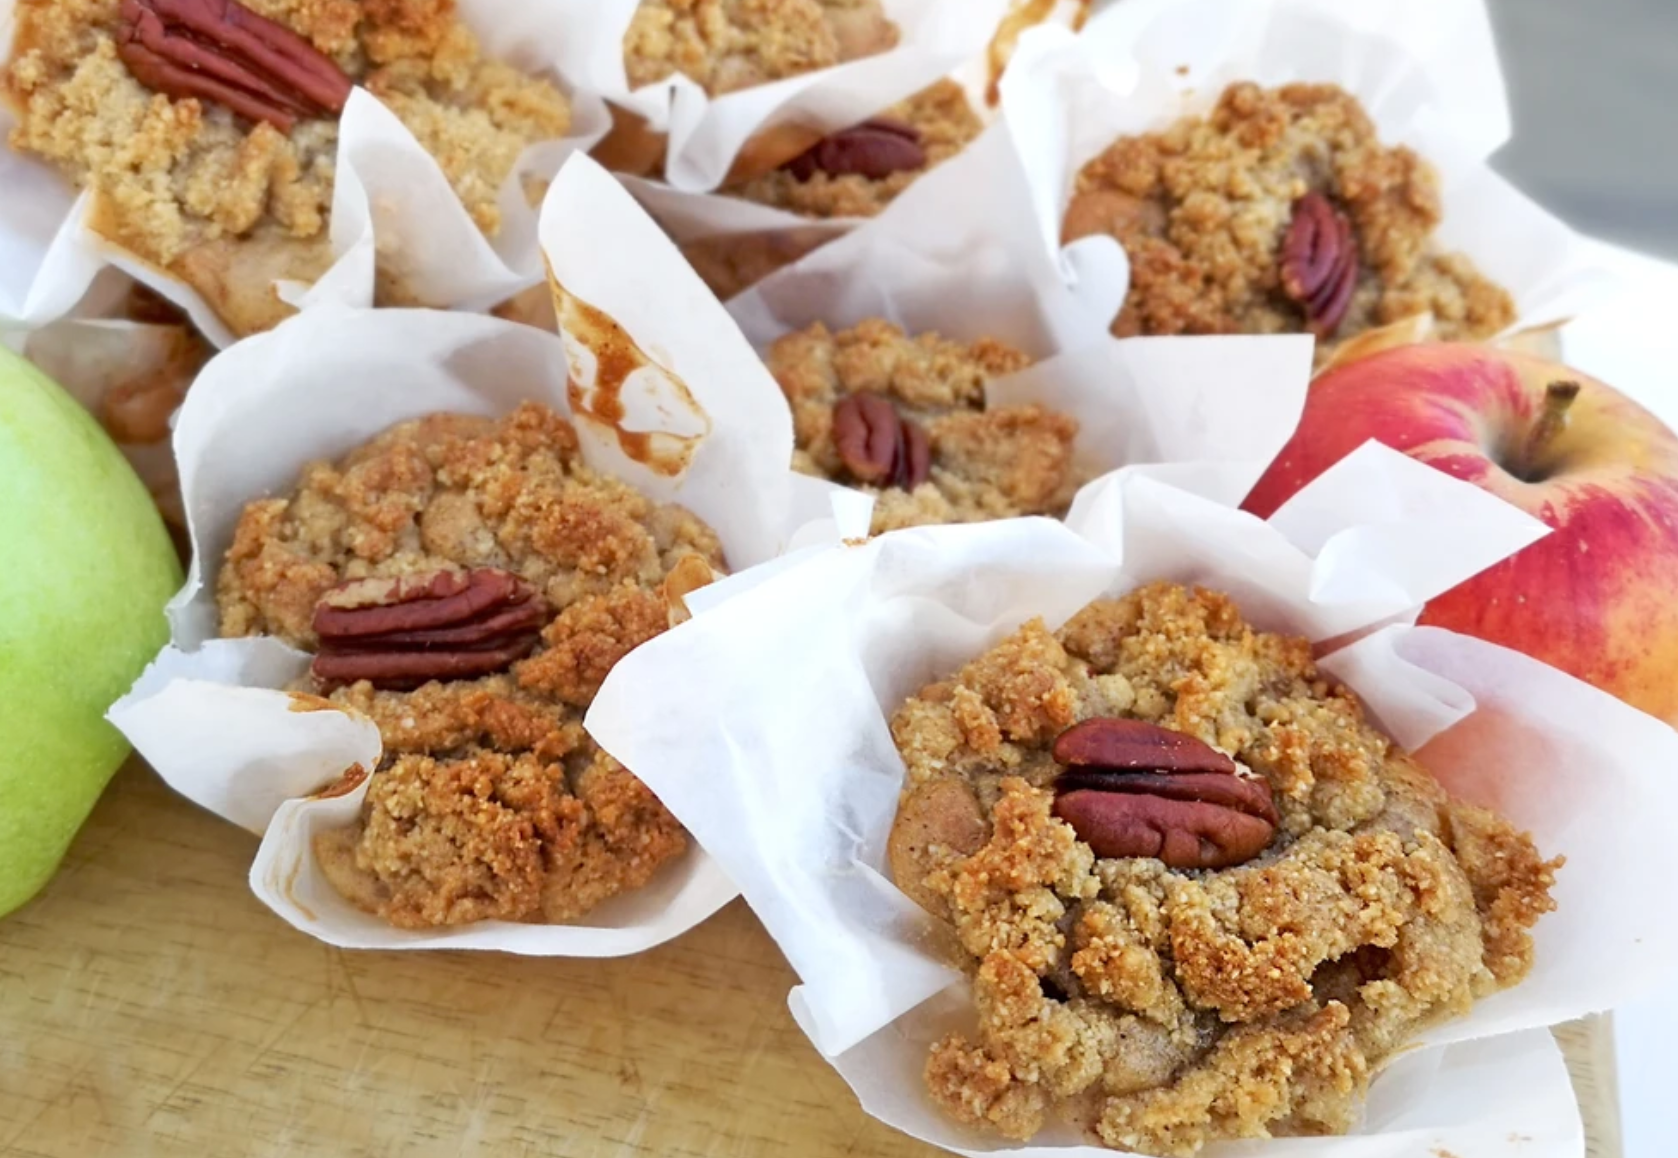 Gluten Free Apple & Cinnamon Muffin with Crumble Topping Recipe